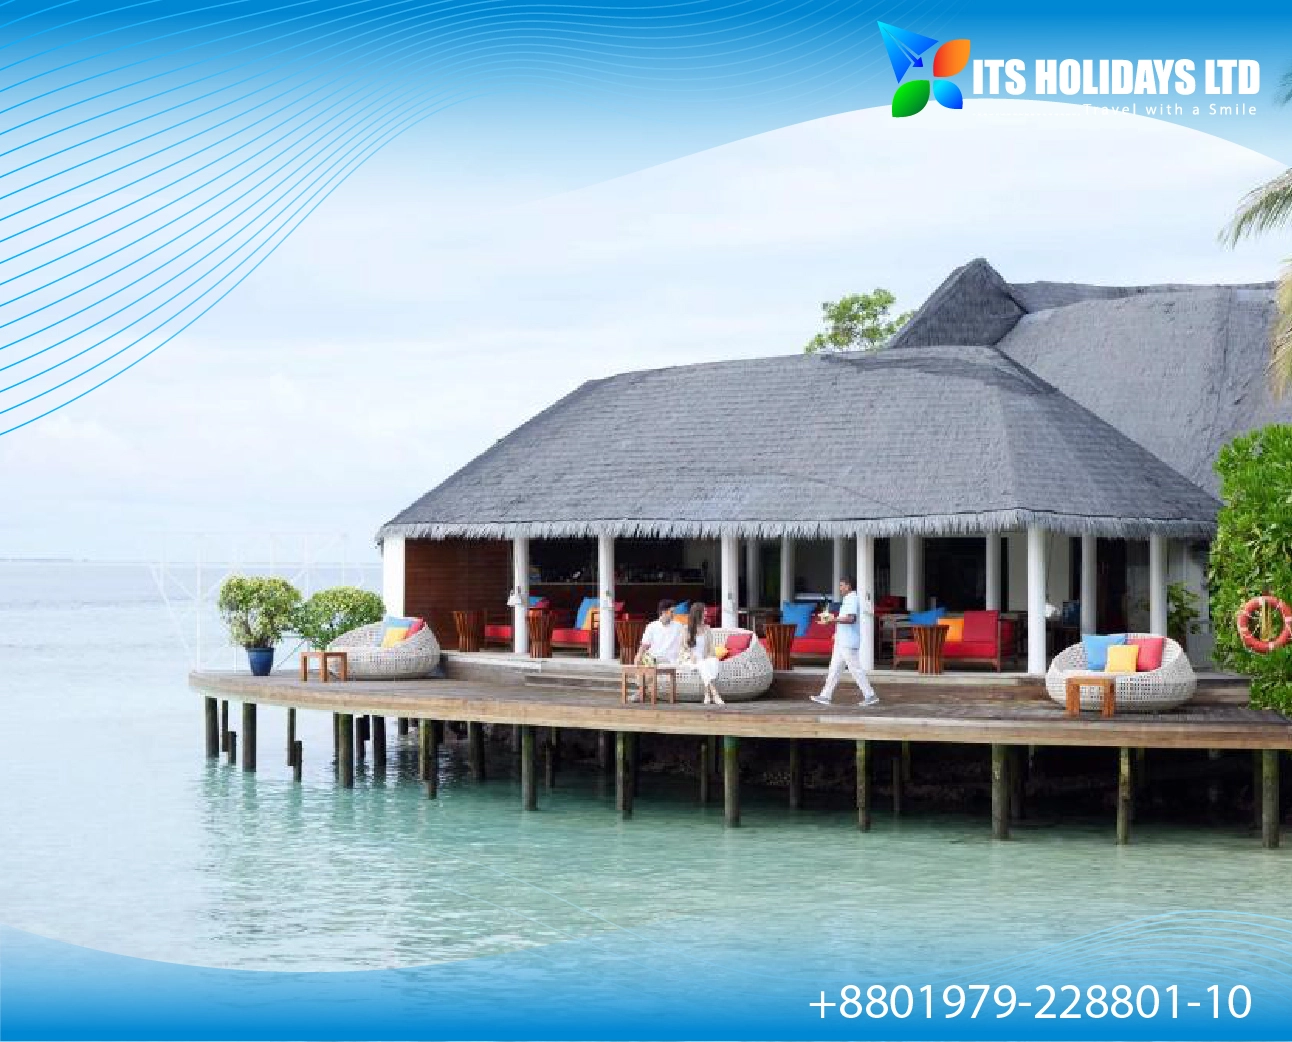 Relax in Maldives Tour Package from Bangladesh - 1